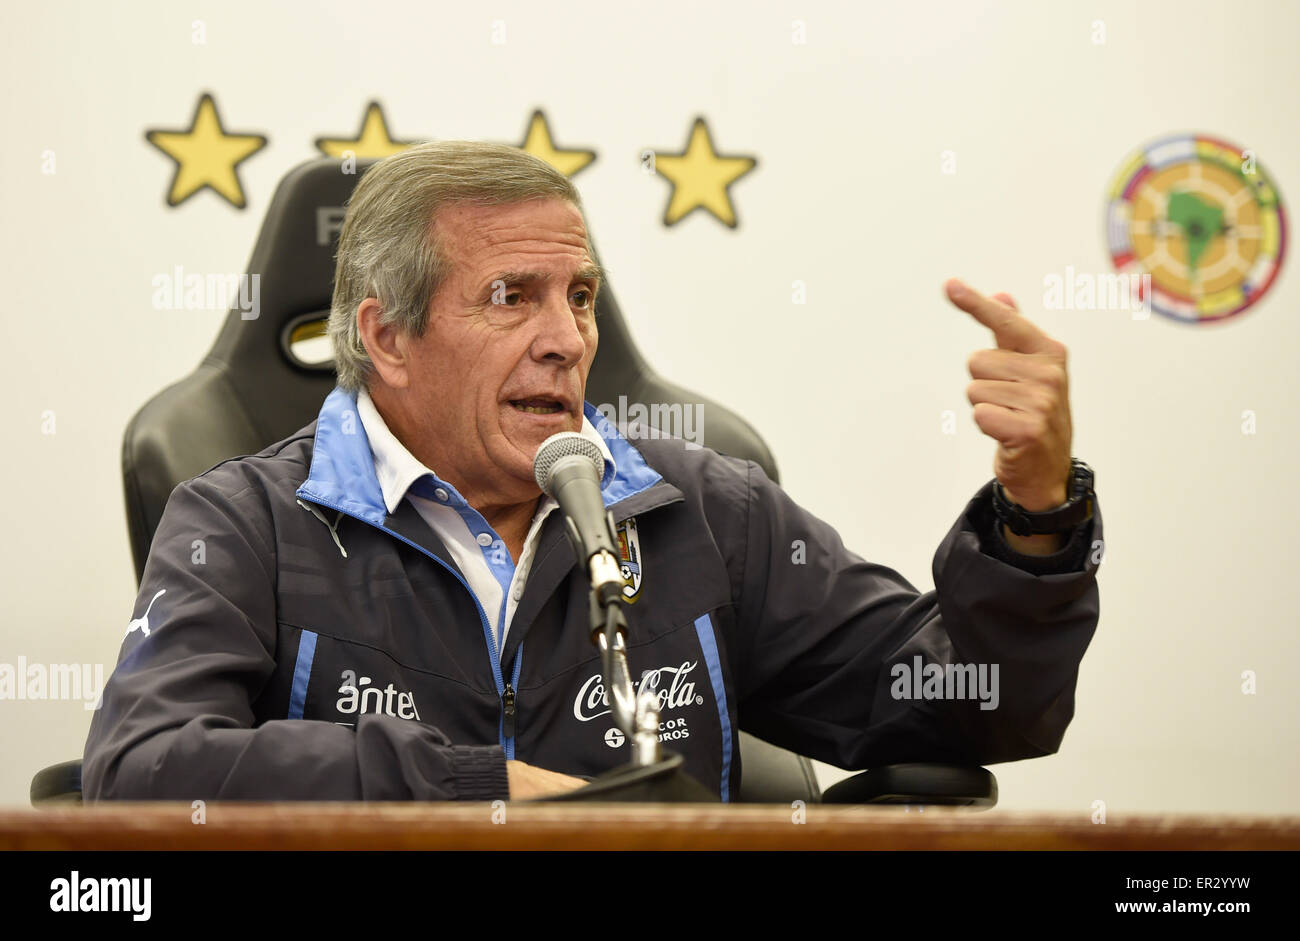 Canelones, Uruguay. 25th May, 2015. Head coach Oscar Washington Tabarez of Uruguay's national soccer team attends a press conference after a training session in the sports complex Uruguay Celeste in Canelones, 30km away from Montevideo, capital of Uruguay, on May 25, 2015. Uruguay's National Soccer Team is training for the Copa America 2015, to be held from June 11 to July 4 in Chile. Credit:  Nicolas Celaya/Xinhua/Alamy Live News Stock Photo